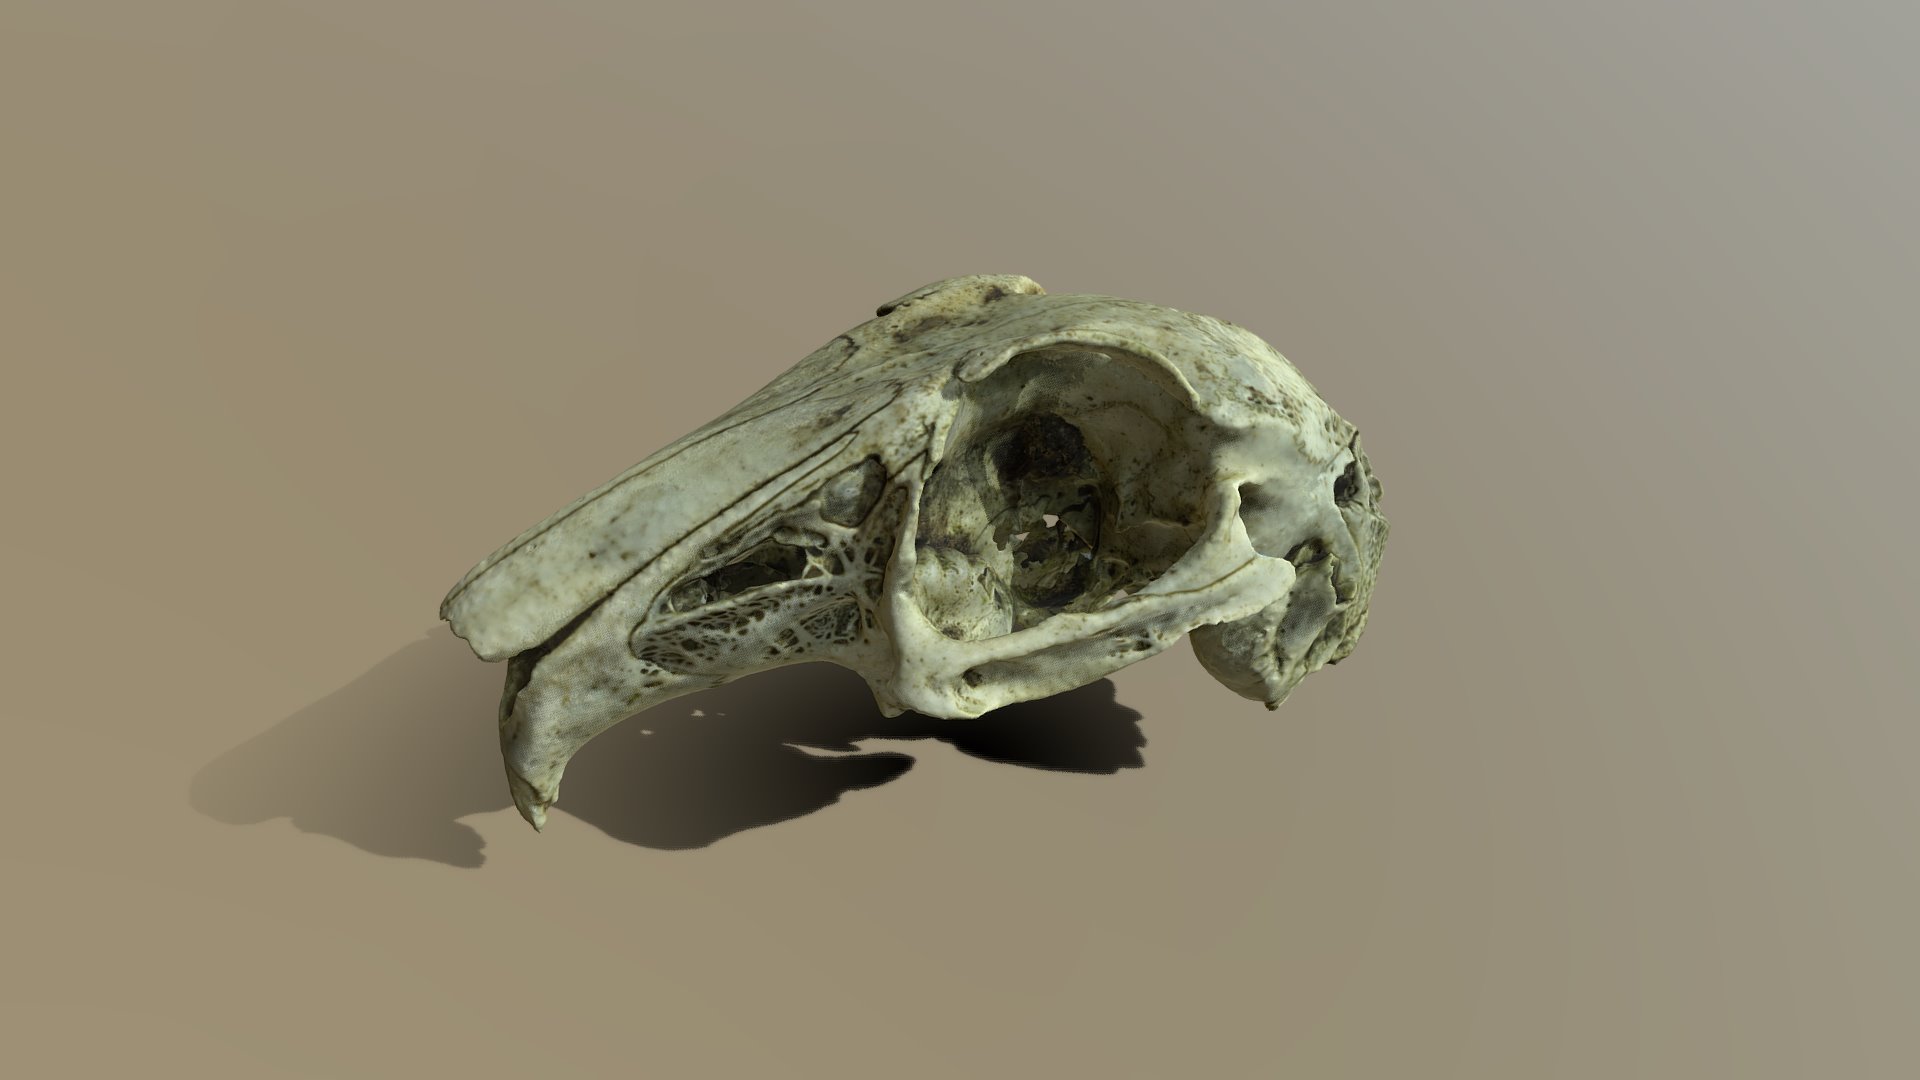 3D model Rabbit Skull, photogrammetry - This is a 3D model of the Rabbit Skull, photogrammetry. The 3D model is about a skull on a surface.